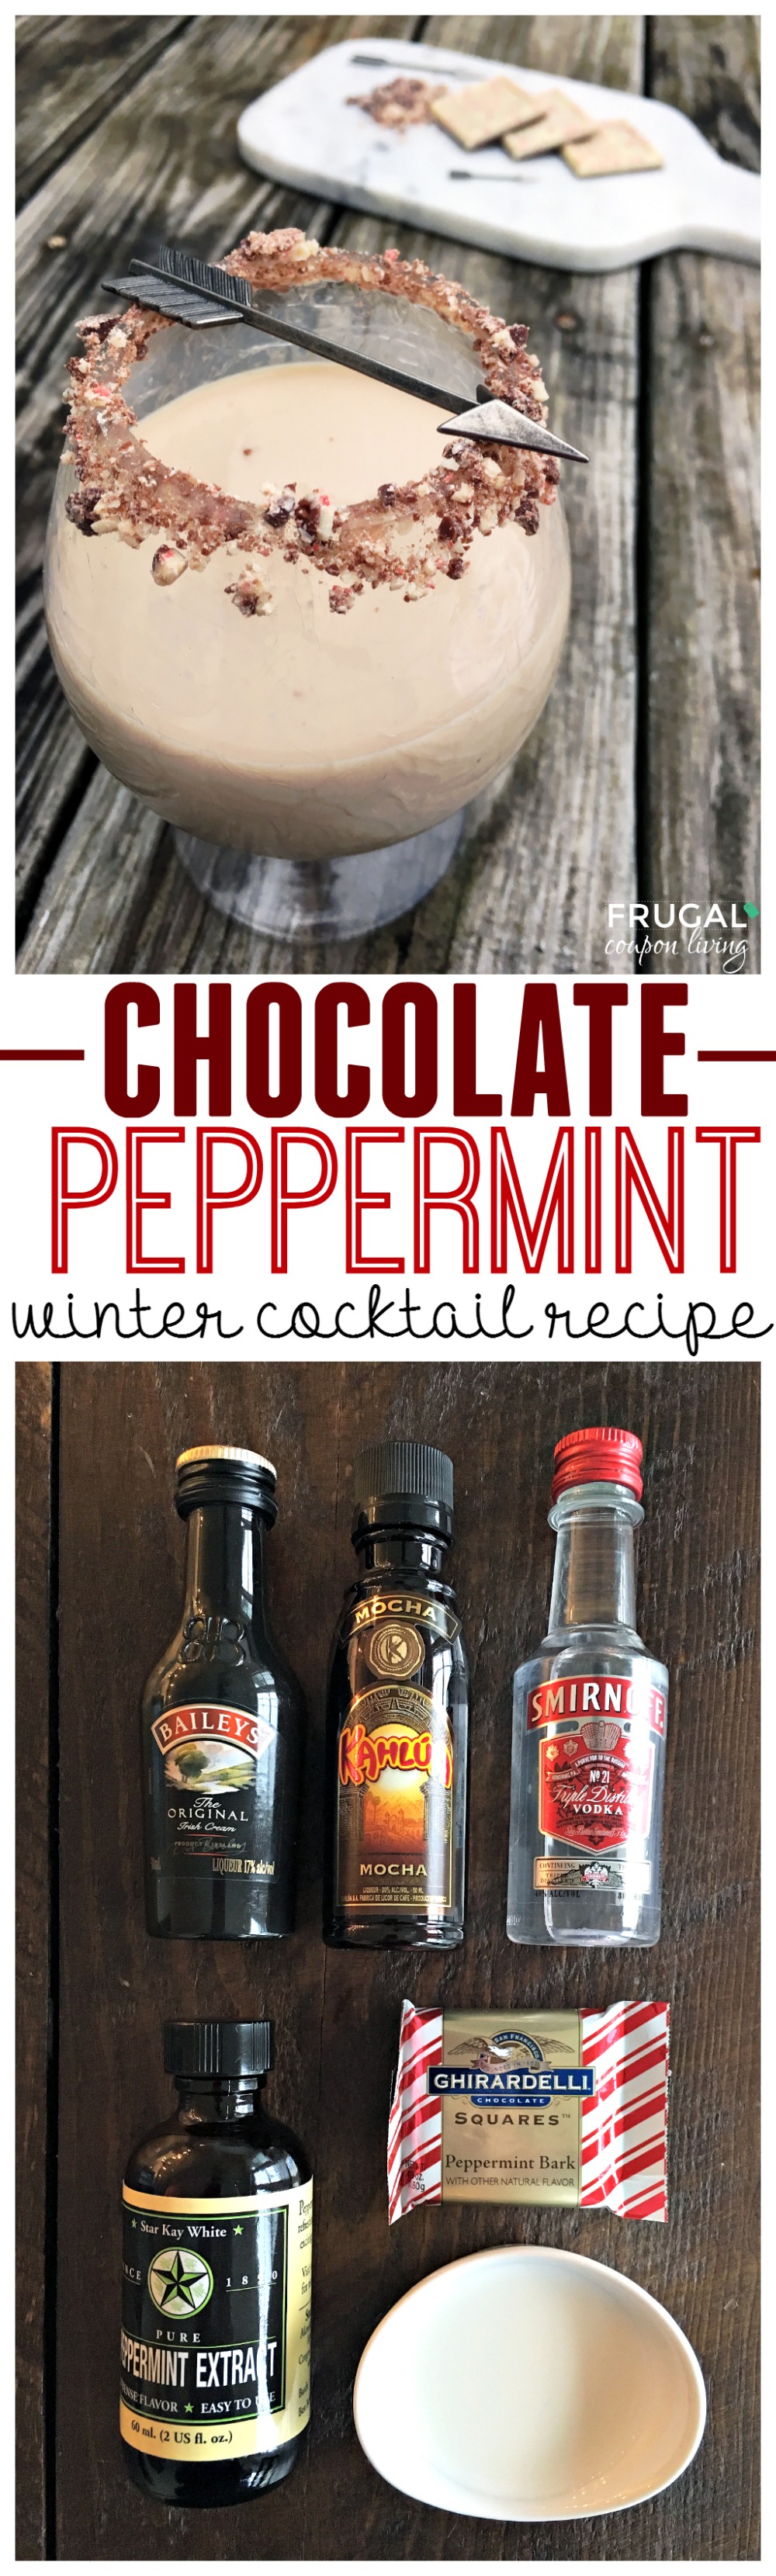 chocolate-peppermint-winter-cocktail-recipe-frugal-coupon-living